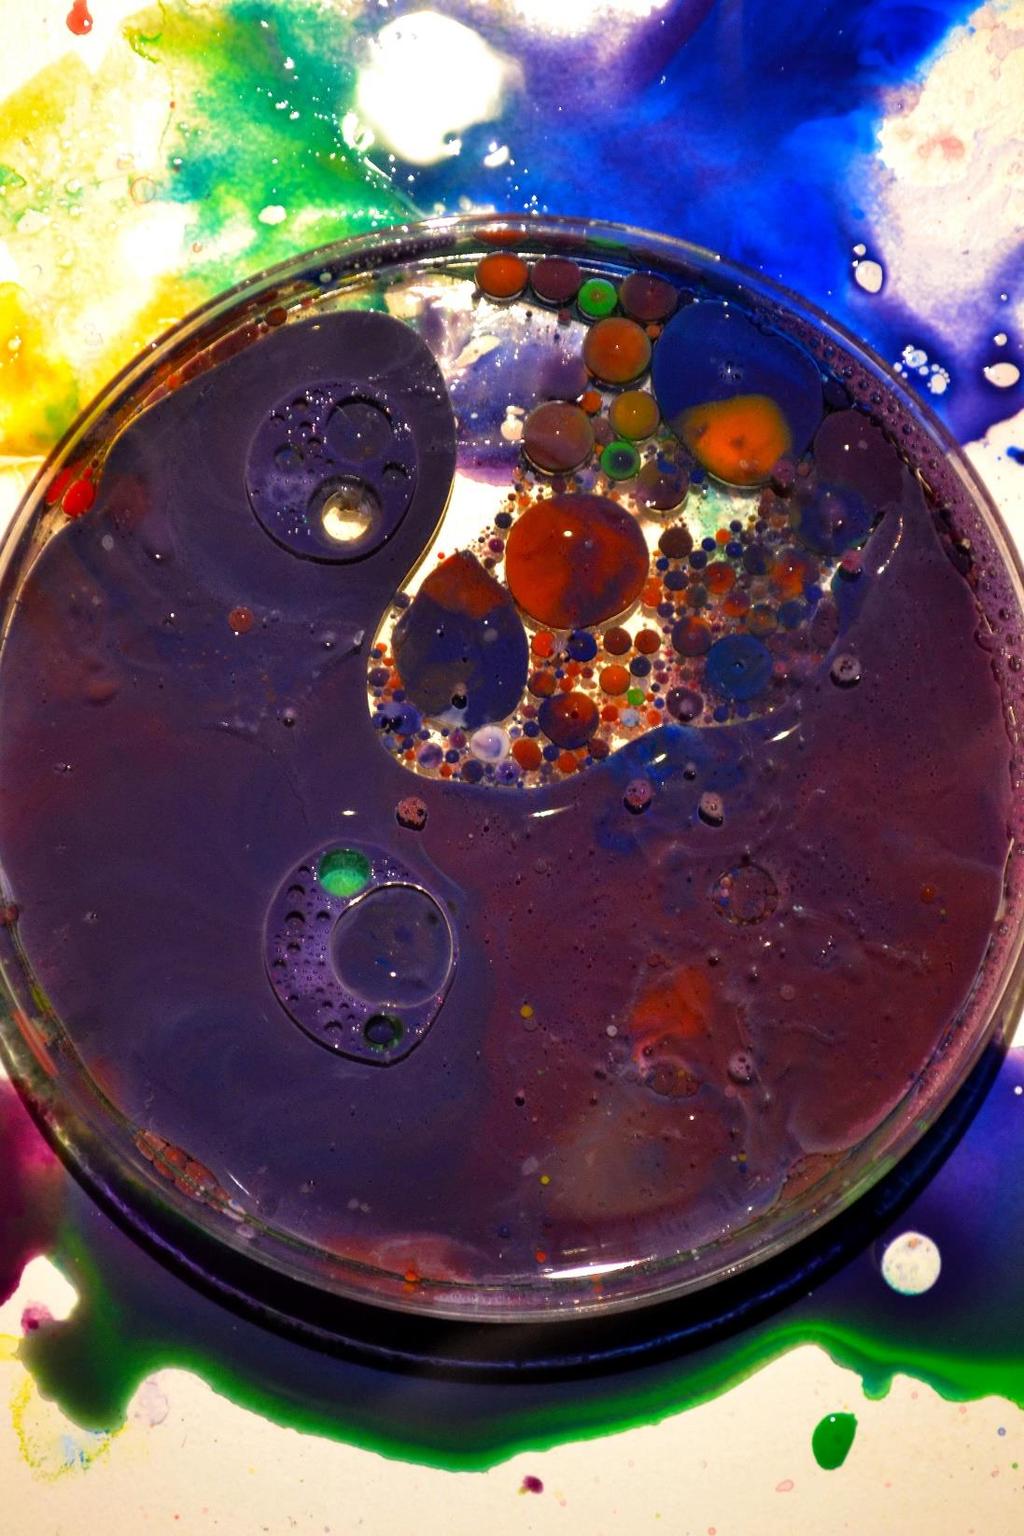 Oil A new found form of art that has provided some beautiful colour spectacles